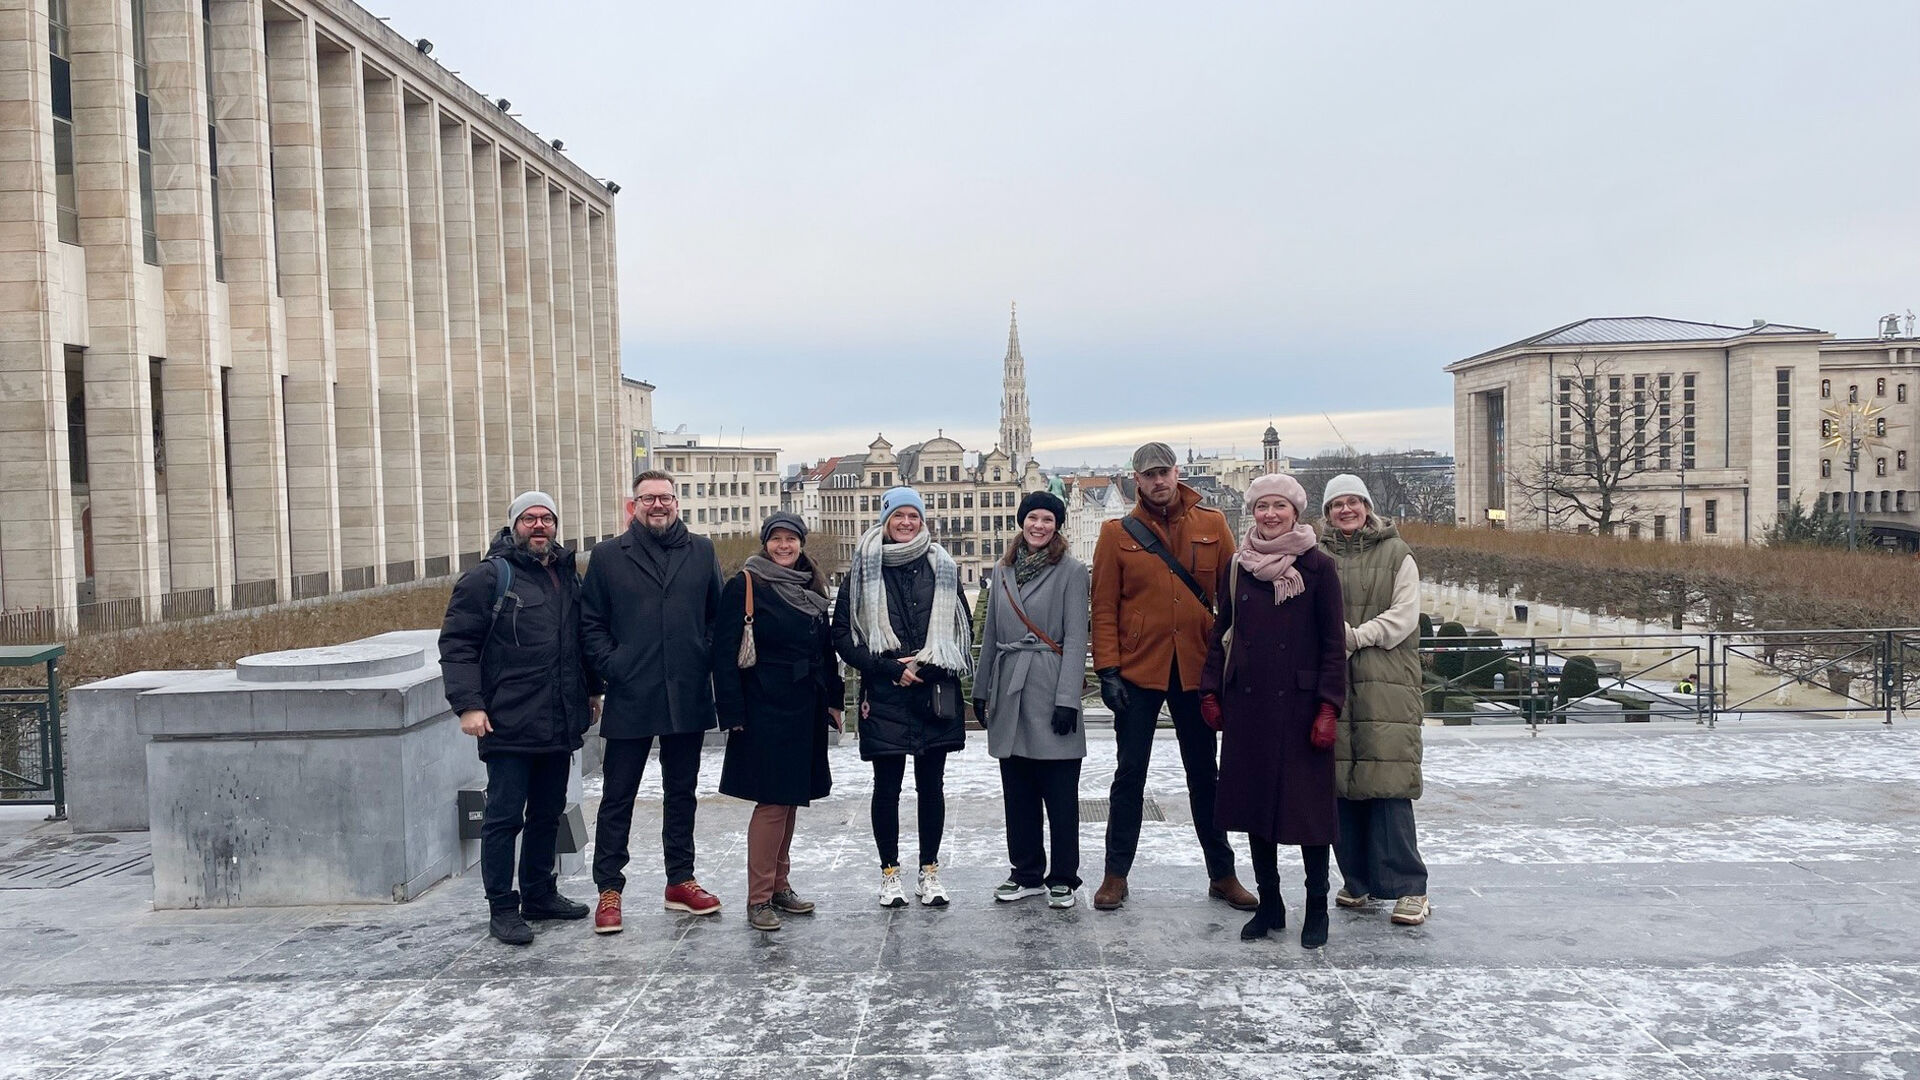 Eight people stand in a row, with their backs to the view of a view of a city. The weather is grey and there is a little snow on the ground.